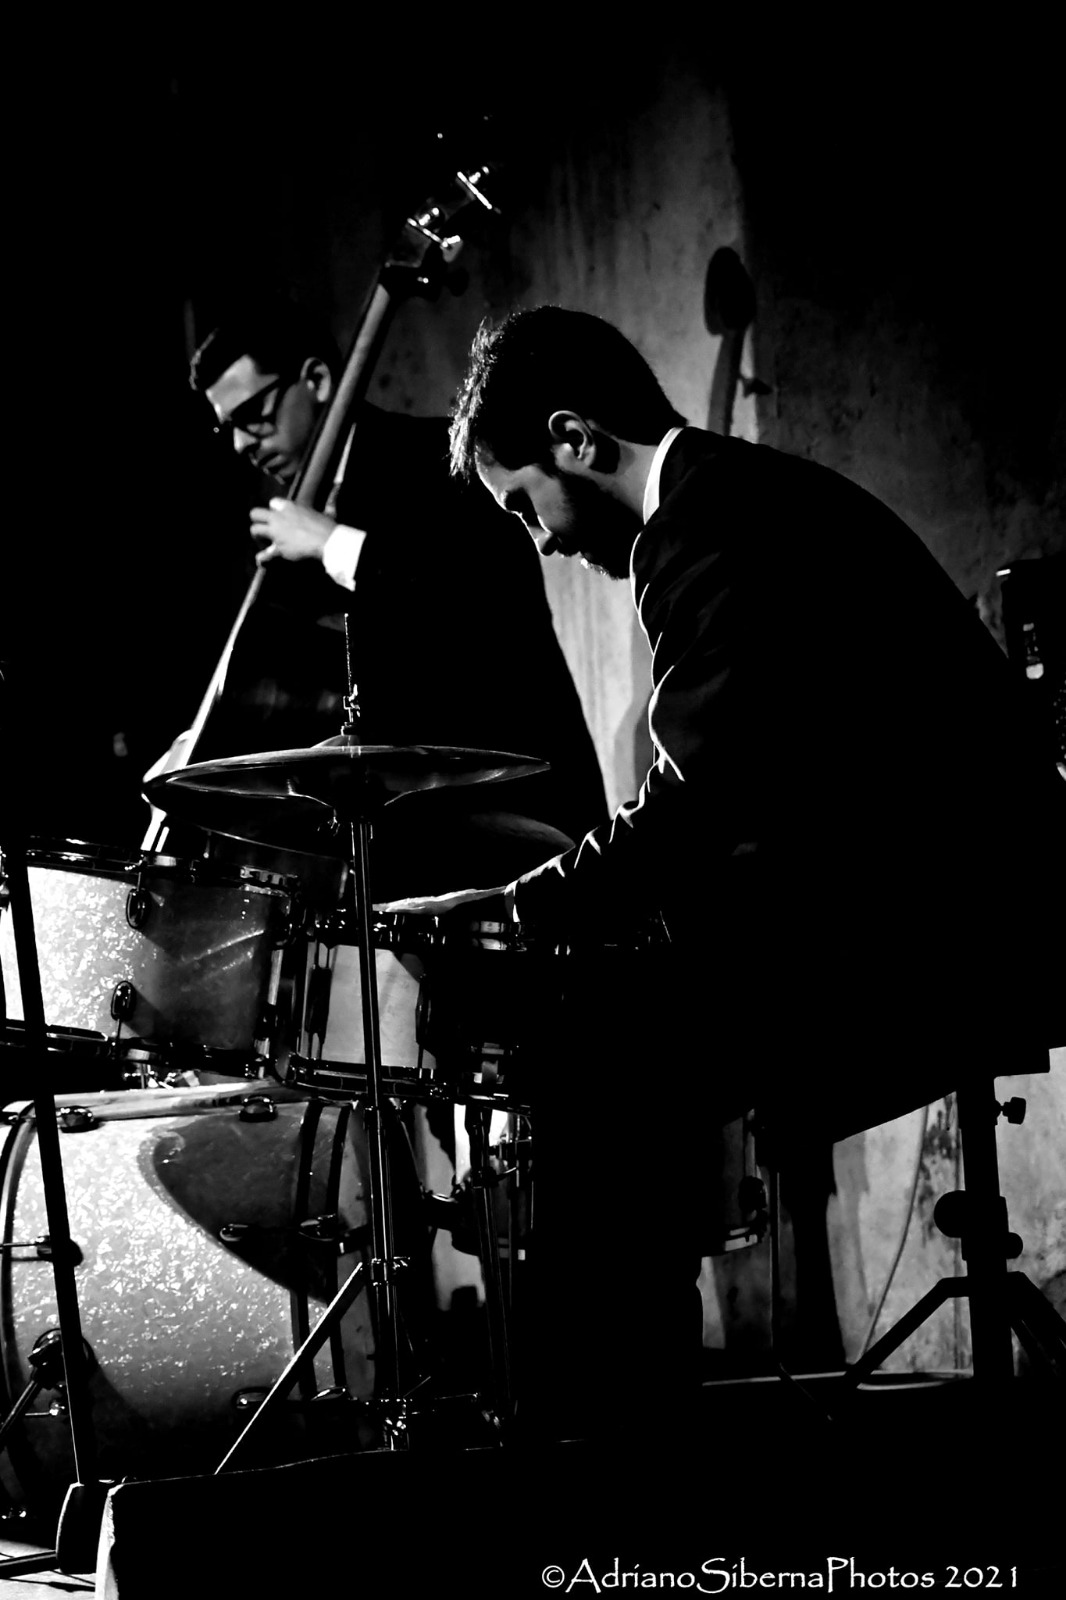 Marco Betti playing the drums and Alessandro Germini playing the bass